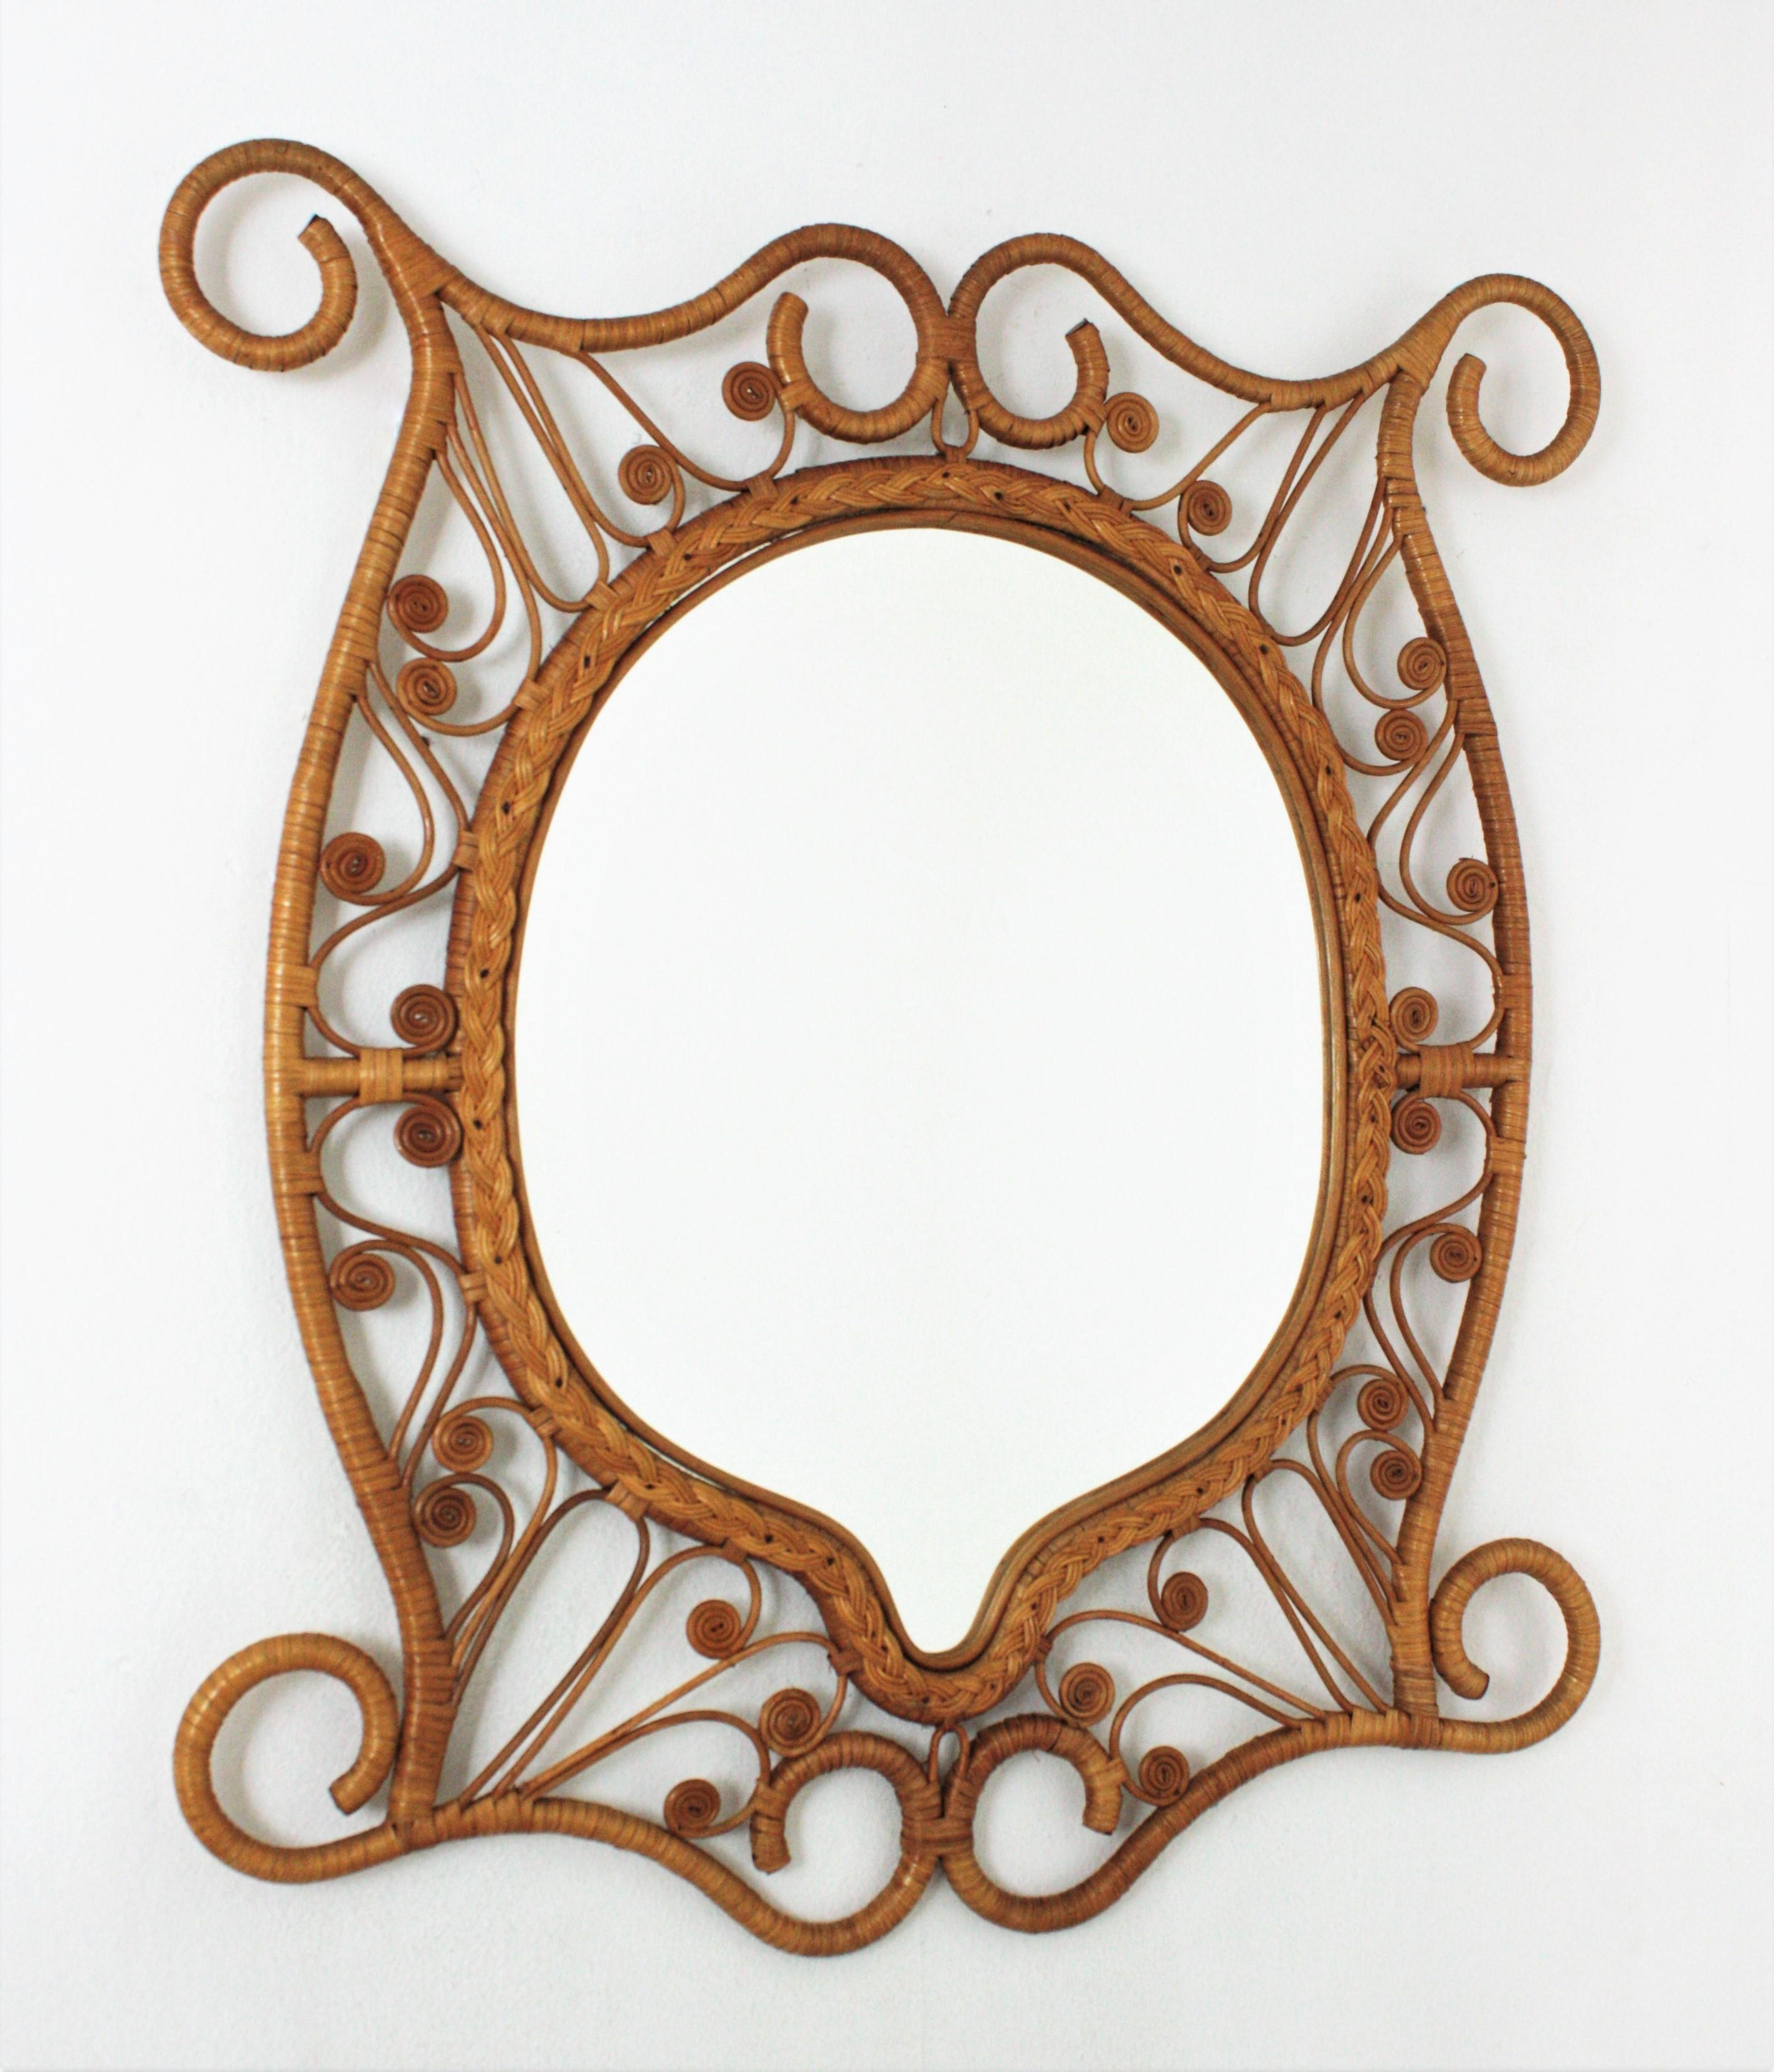 One of a kind handcrafted rattan mirror with scroll endings and Filigree peacok frame. Spain, 1960s.
This mirror features a beautiful artistic filigree peacock frame entirely handcrafted in wicker and rattan, with decorations thorough. It has all